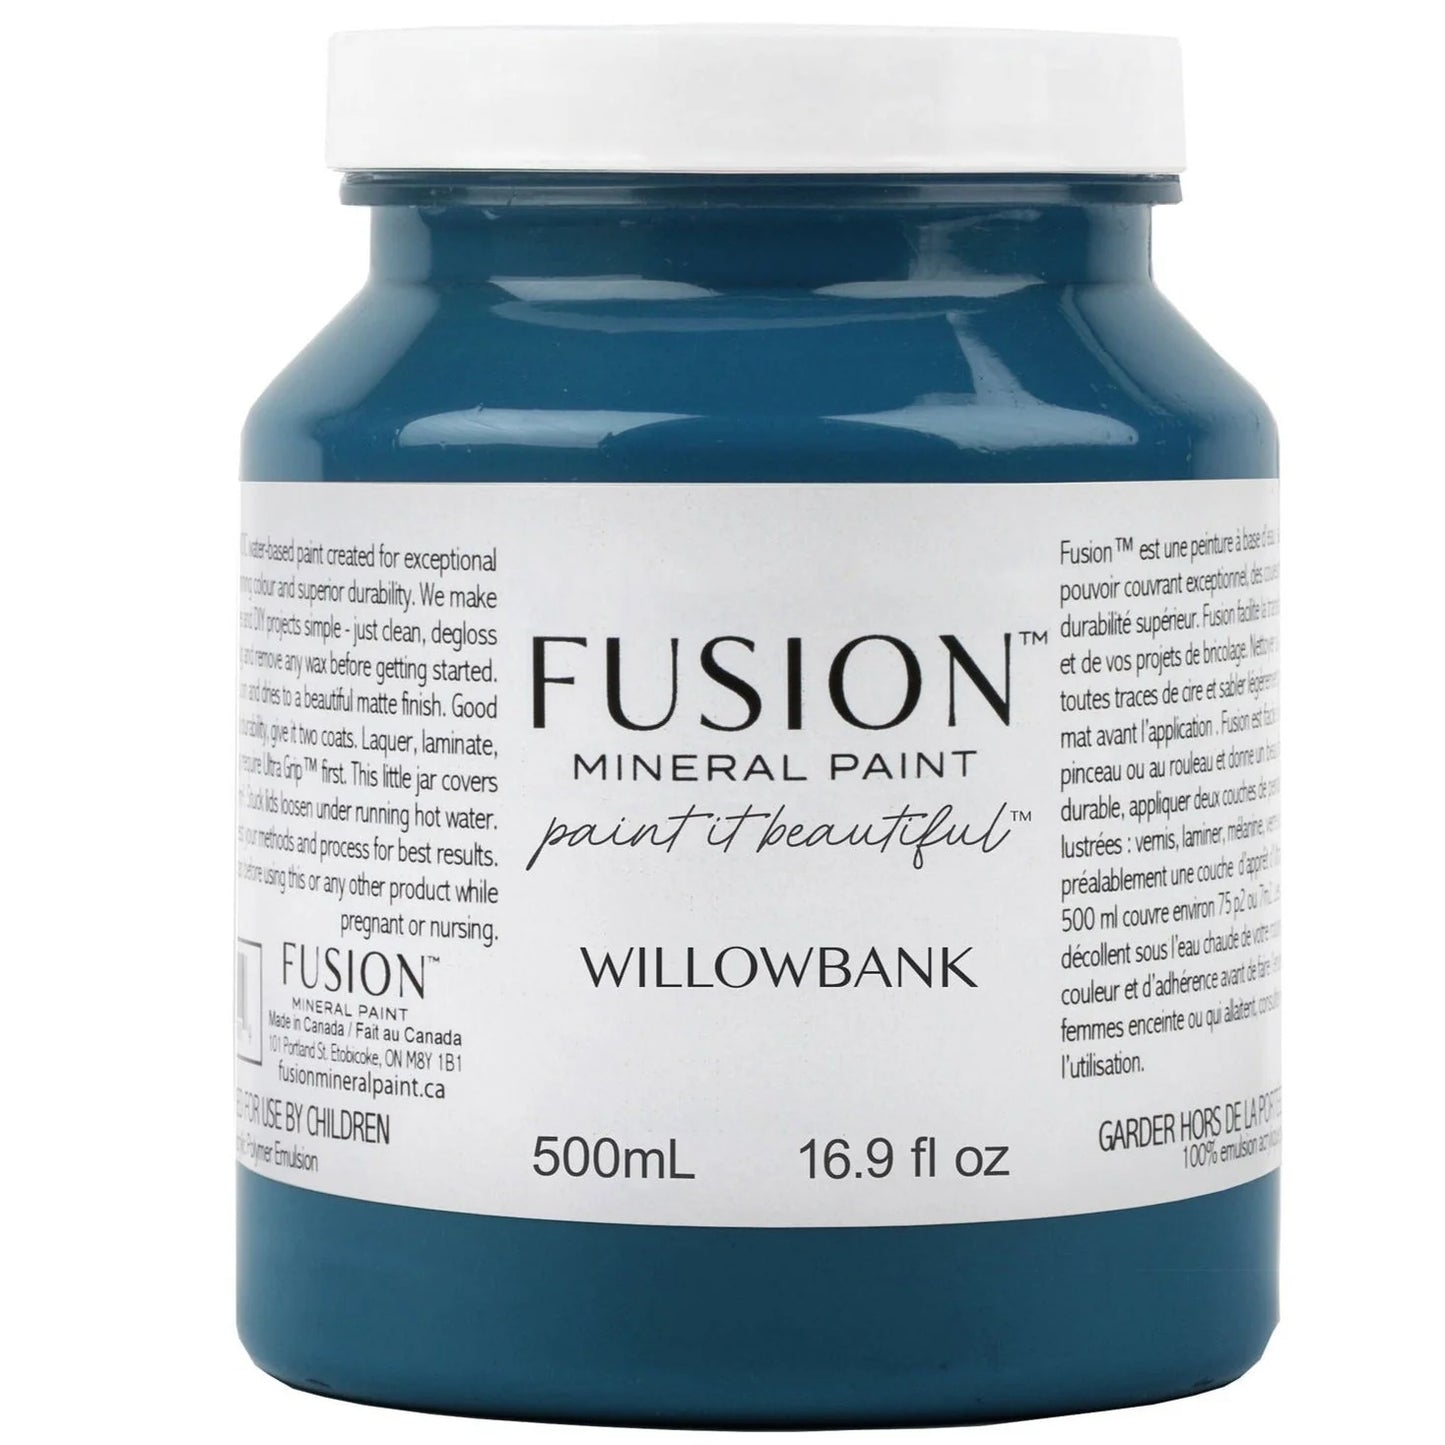 Willowbank by Fusion